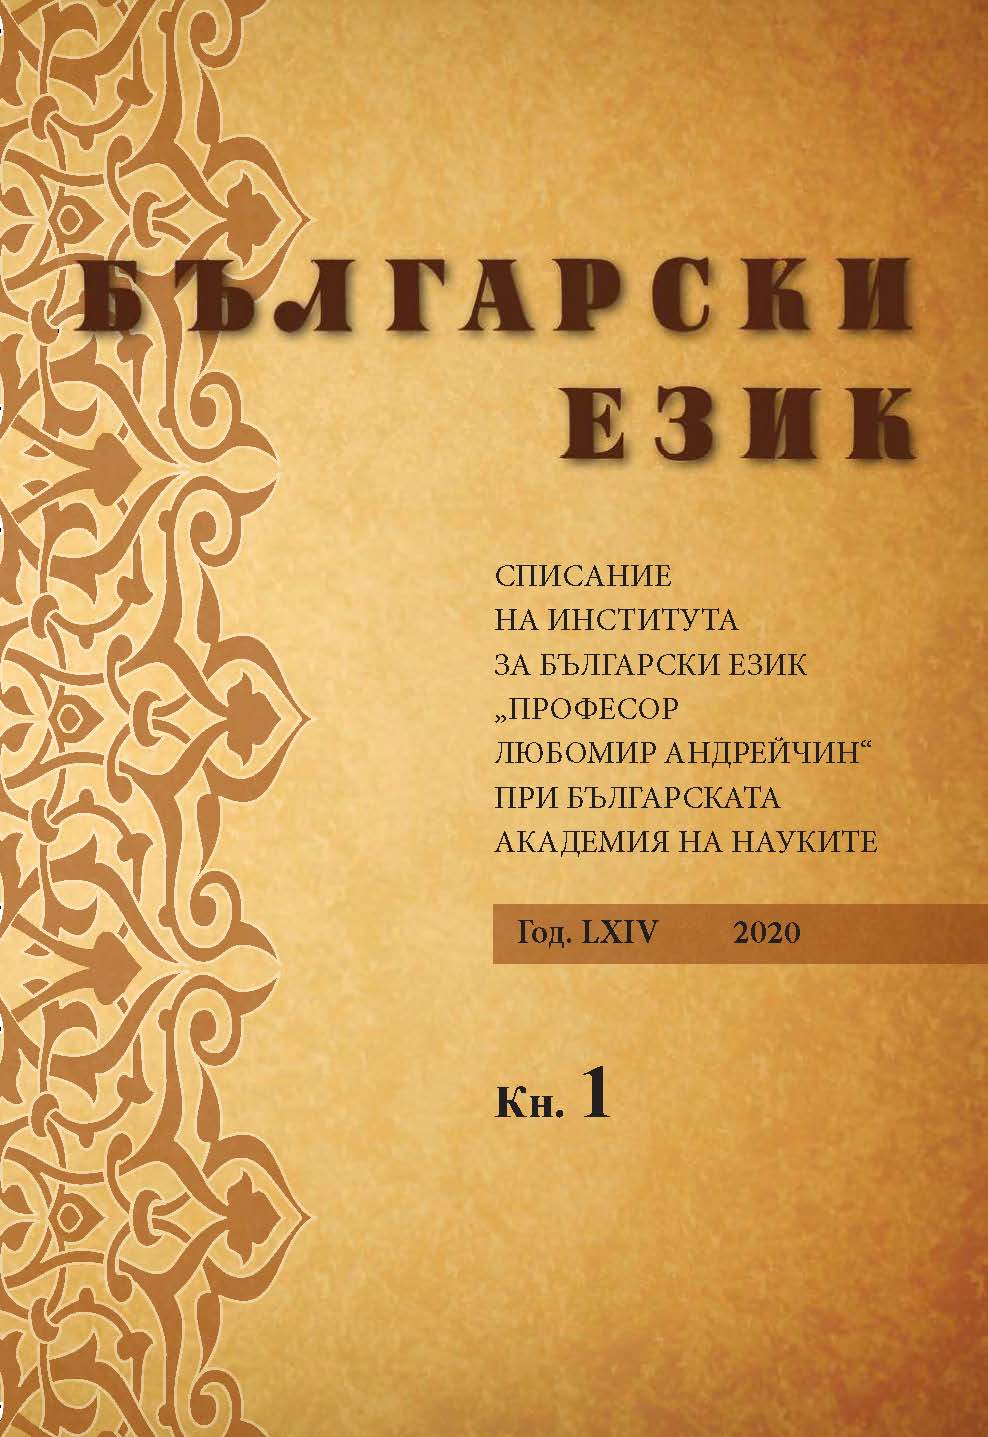 Dionysius Divni’s Idiolect in the Translation of the Homiletic Cycle on The Seraphim by St. John Chrysostom Cover Image